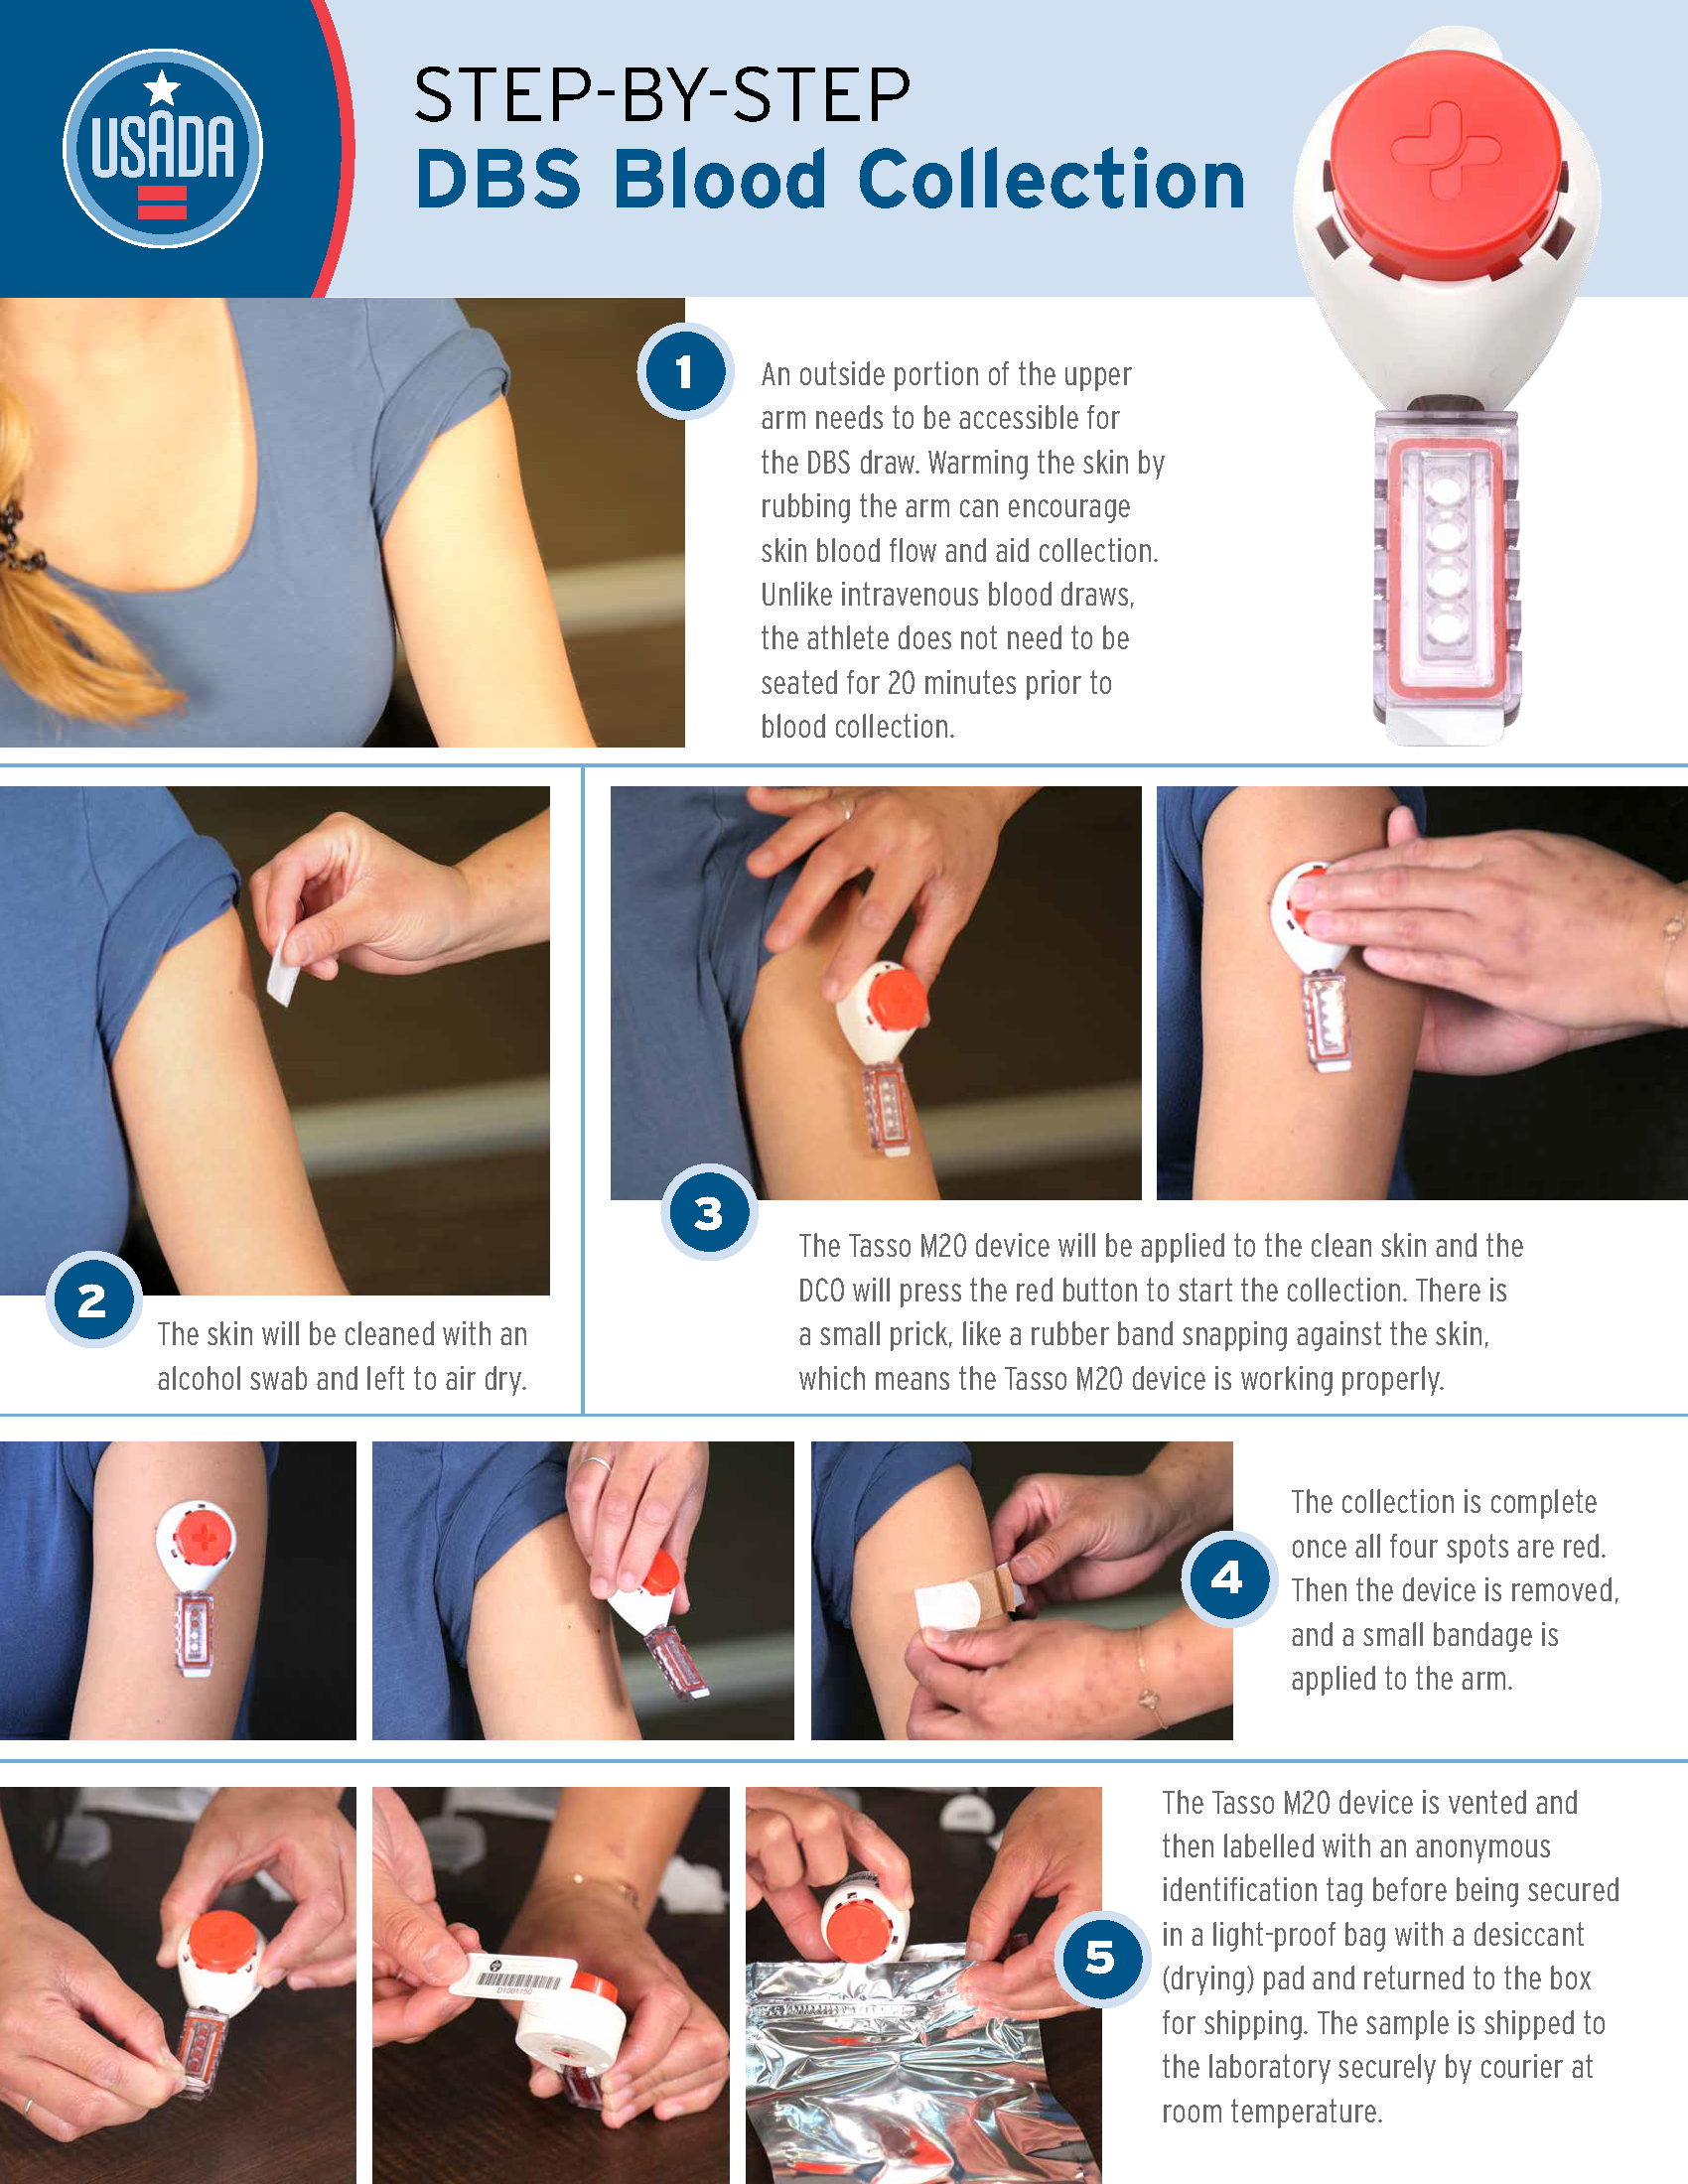 Dried Blood Spot Collection Step-by-Step image.